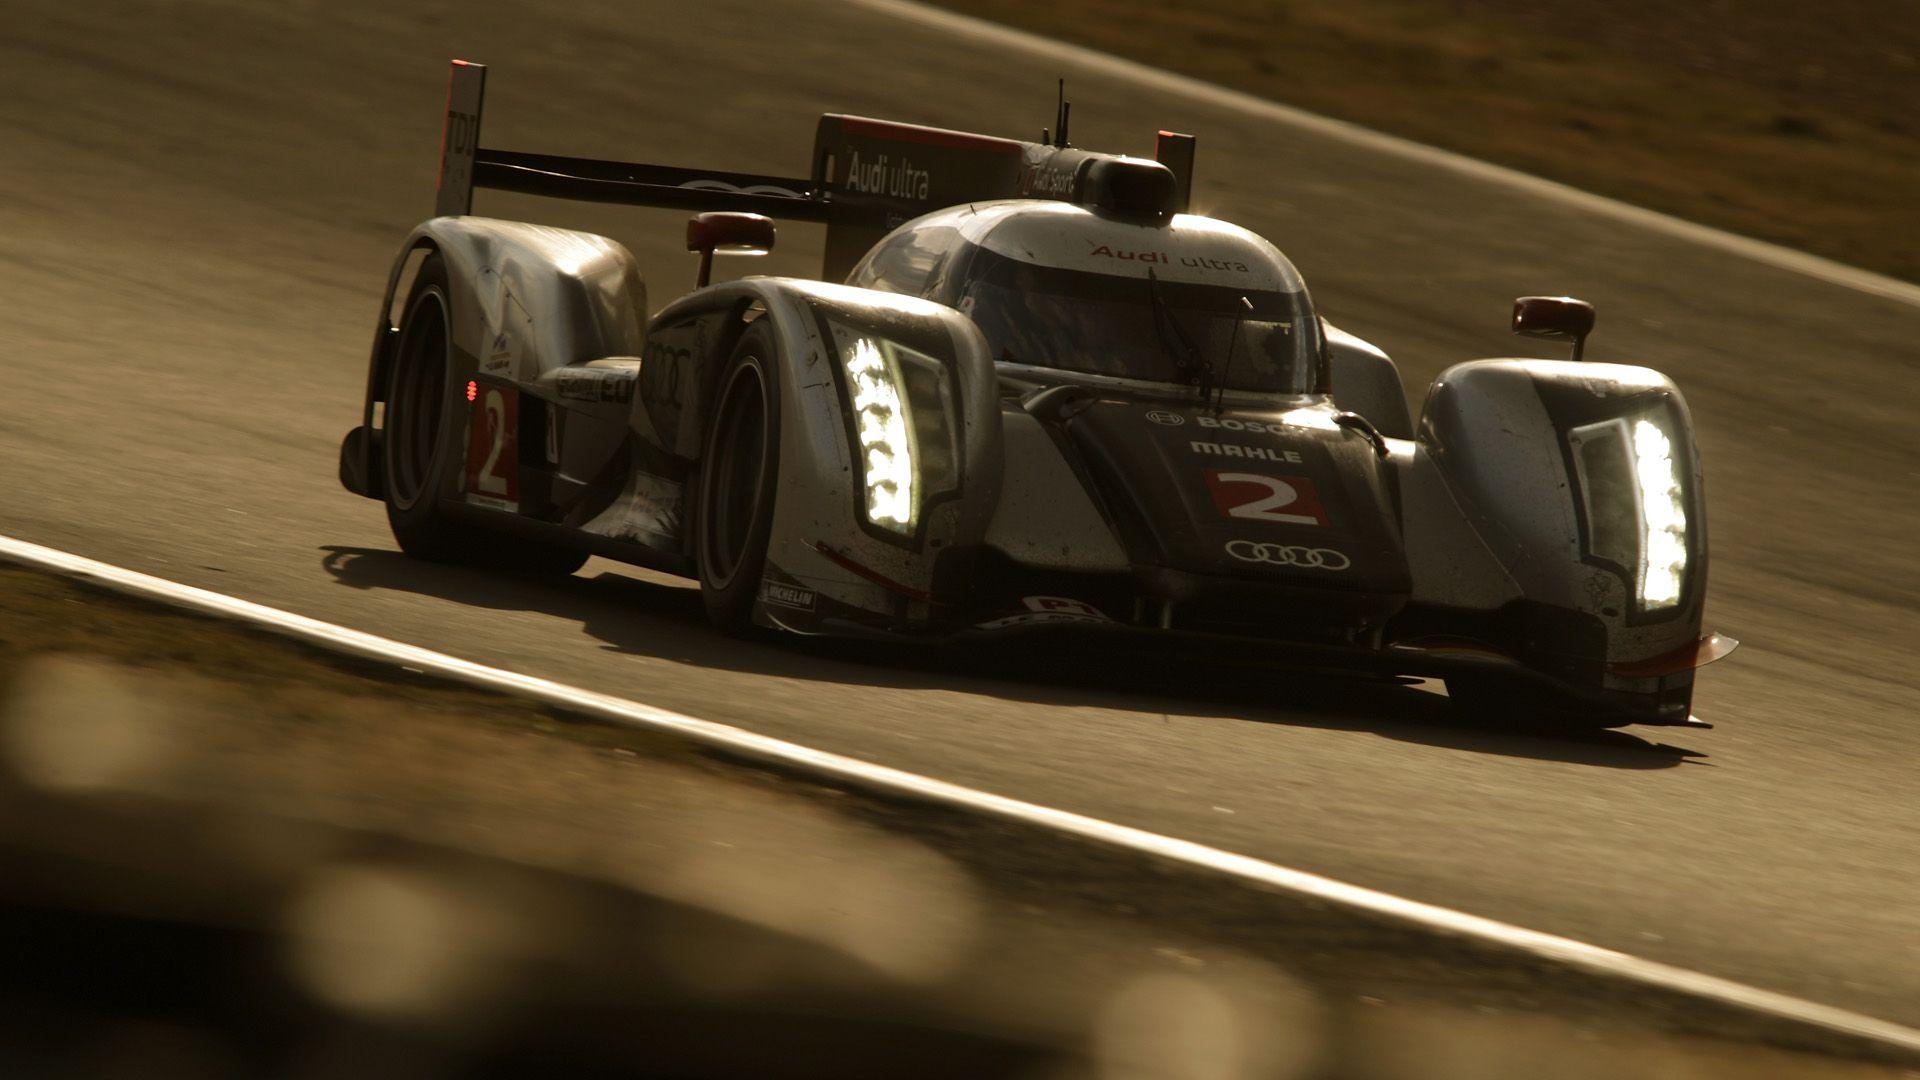 Audi LeMans Wallpaper HD Photo, Wallpaper and other Image